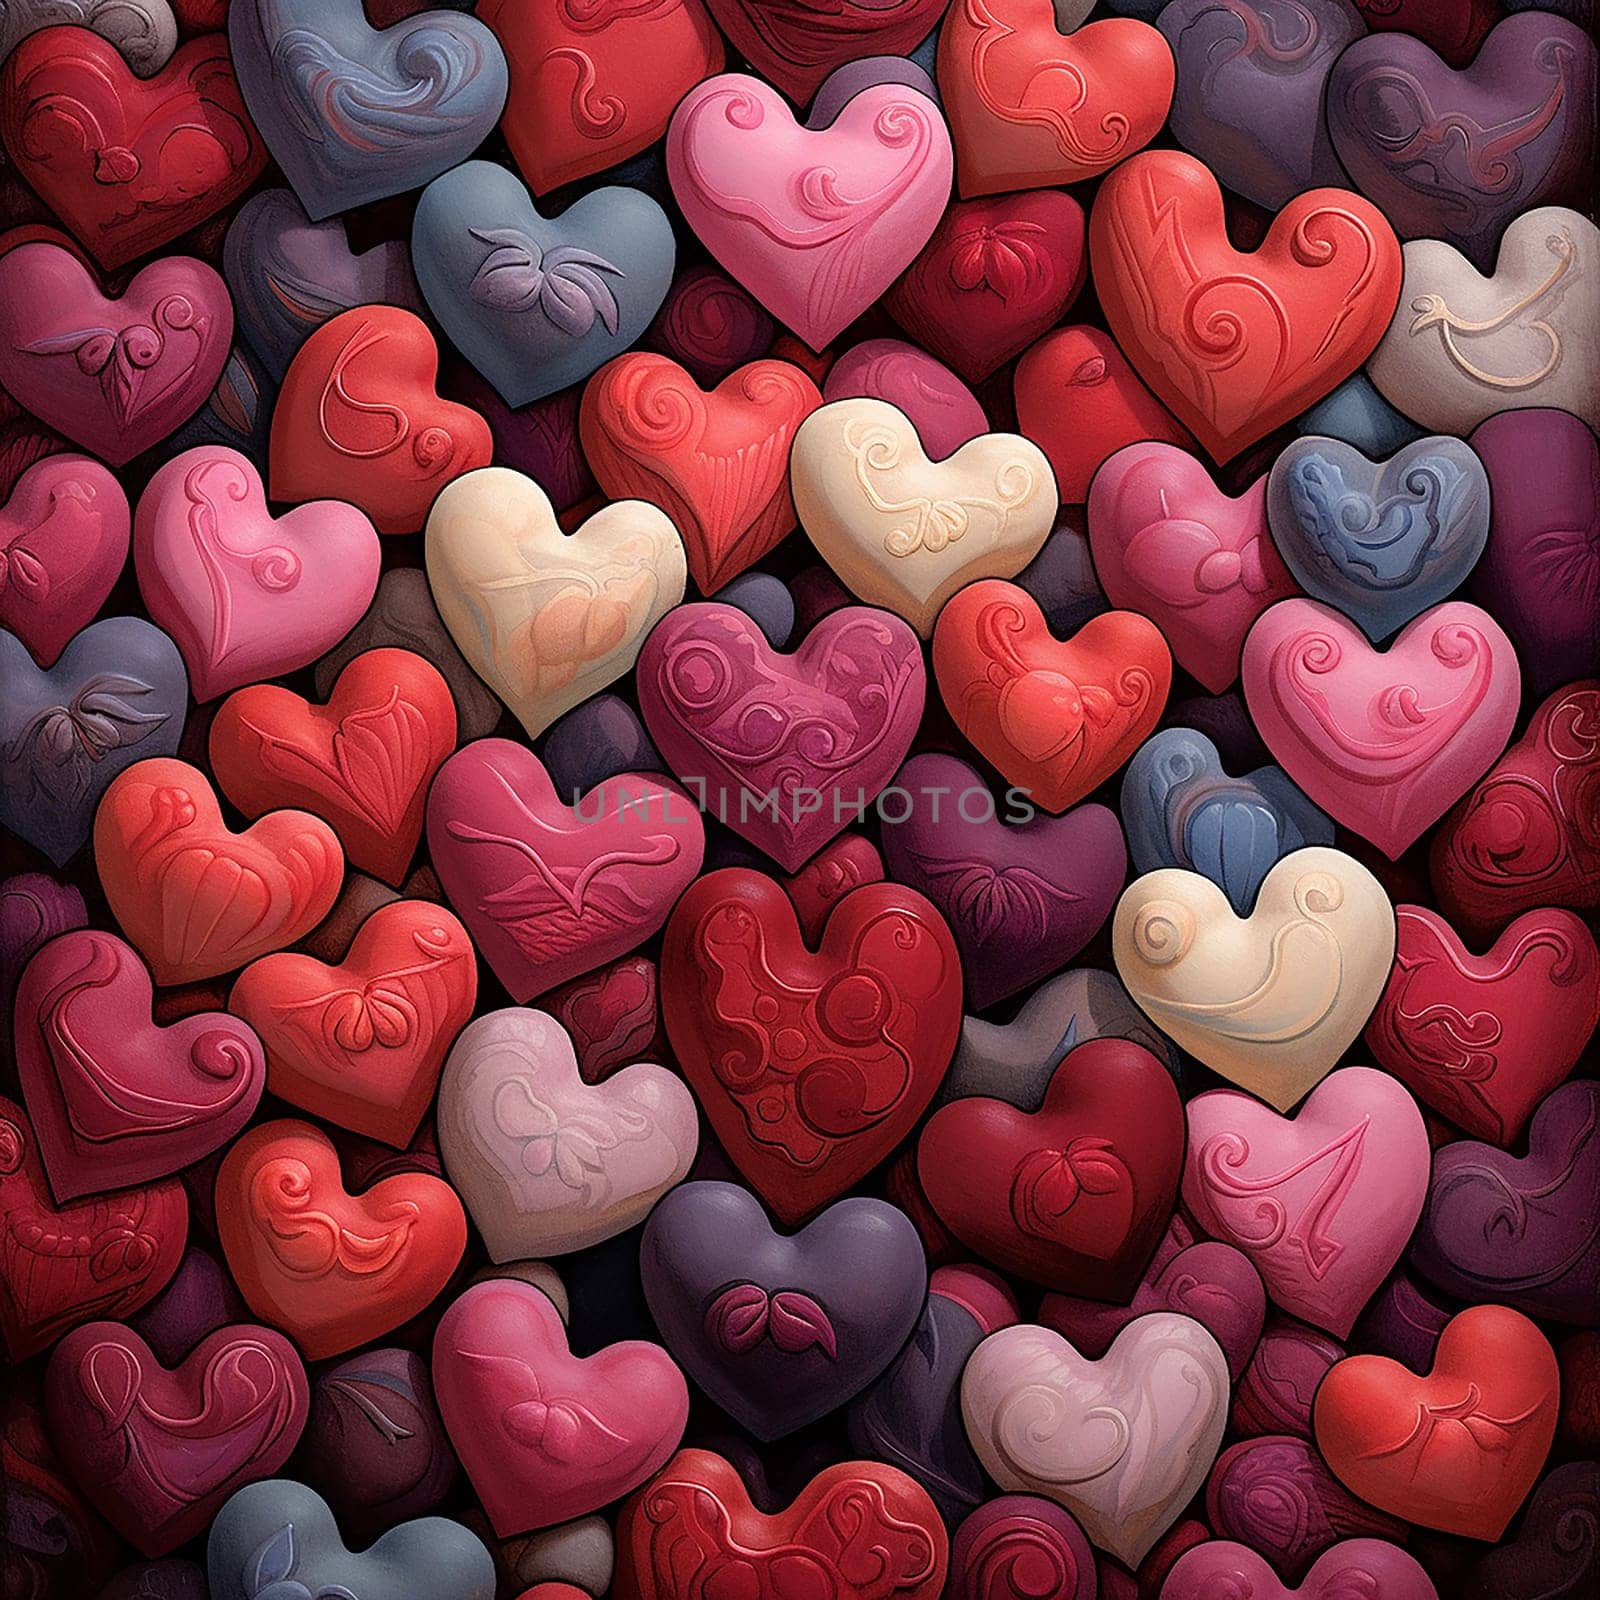 Multicolored heart shapes with various patterns in a tight arrangement. by Hype2art